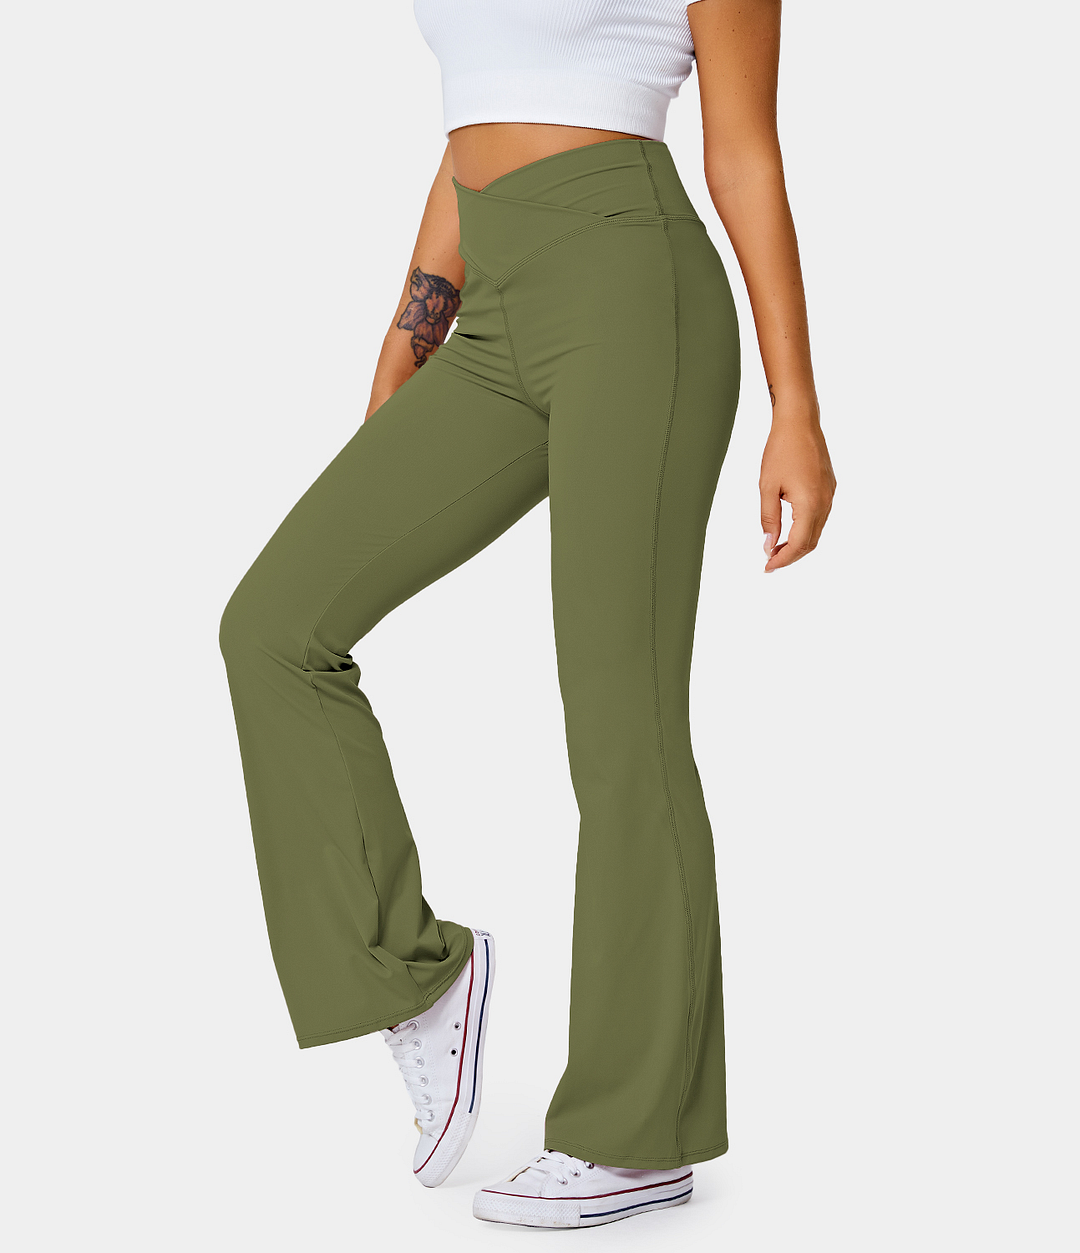  Womens Casual Bootleg Yoga Pants V Crossover High Waisted  Flare Workout Pants Leggings Olive Green